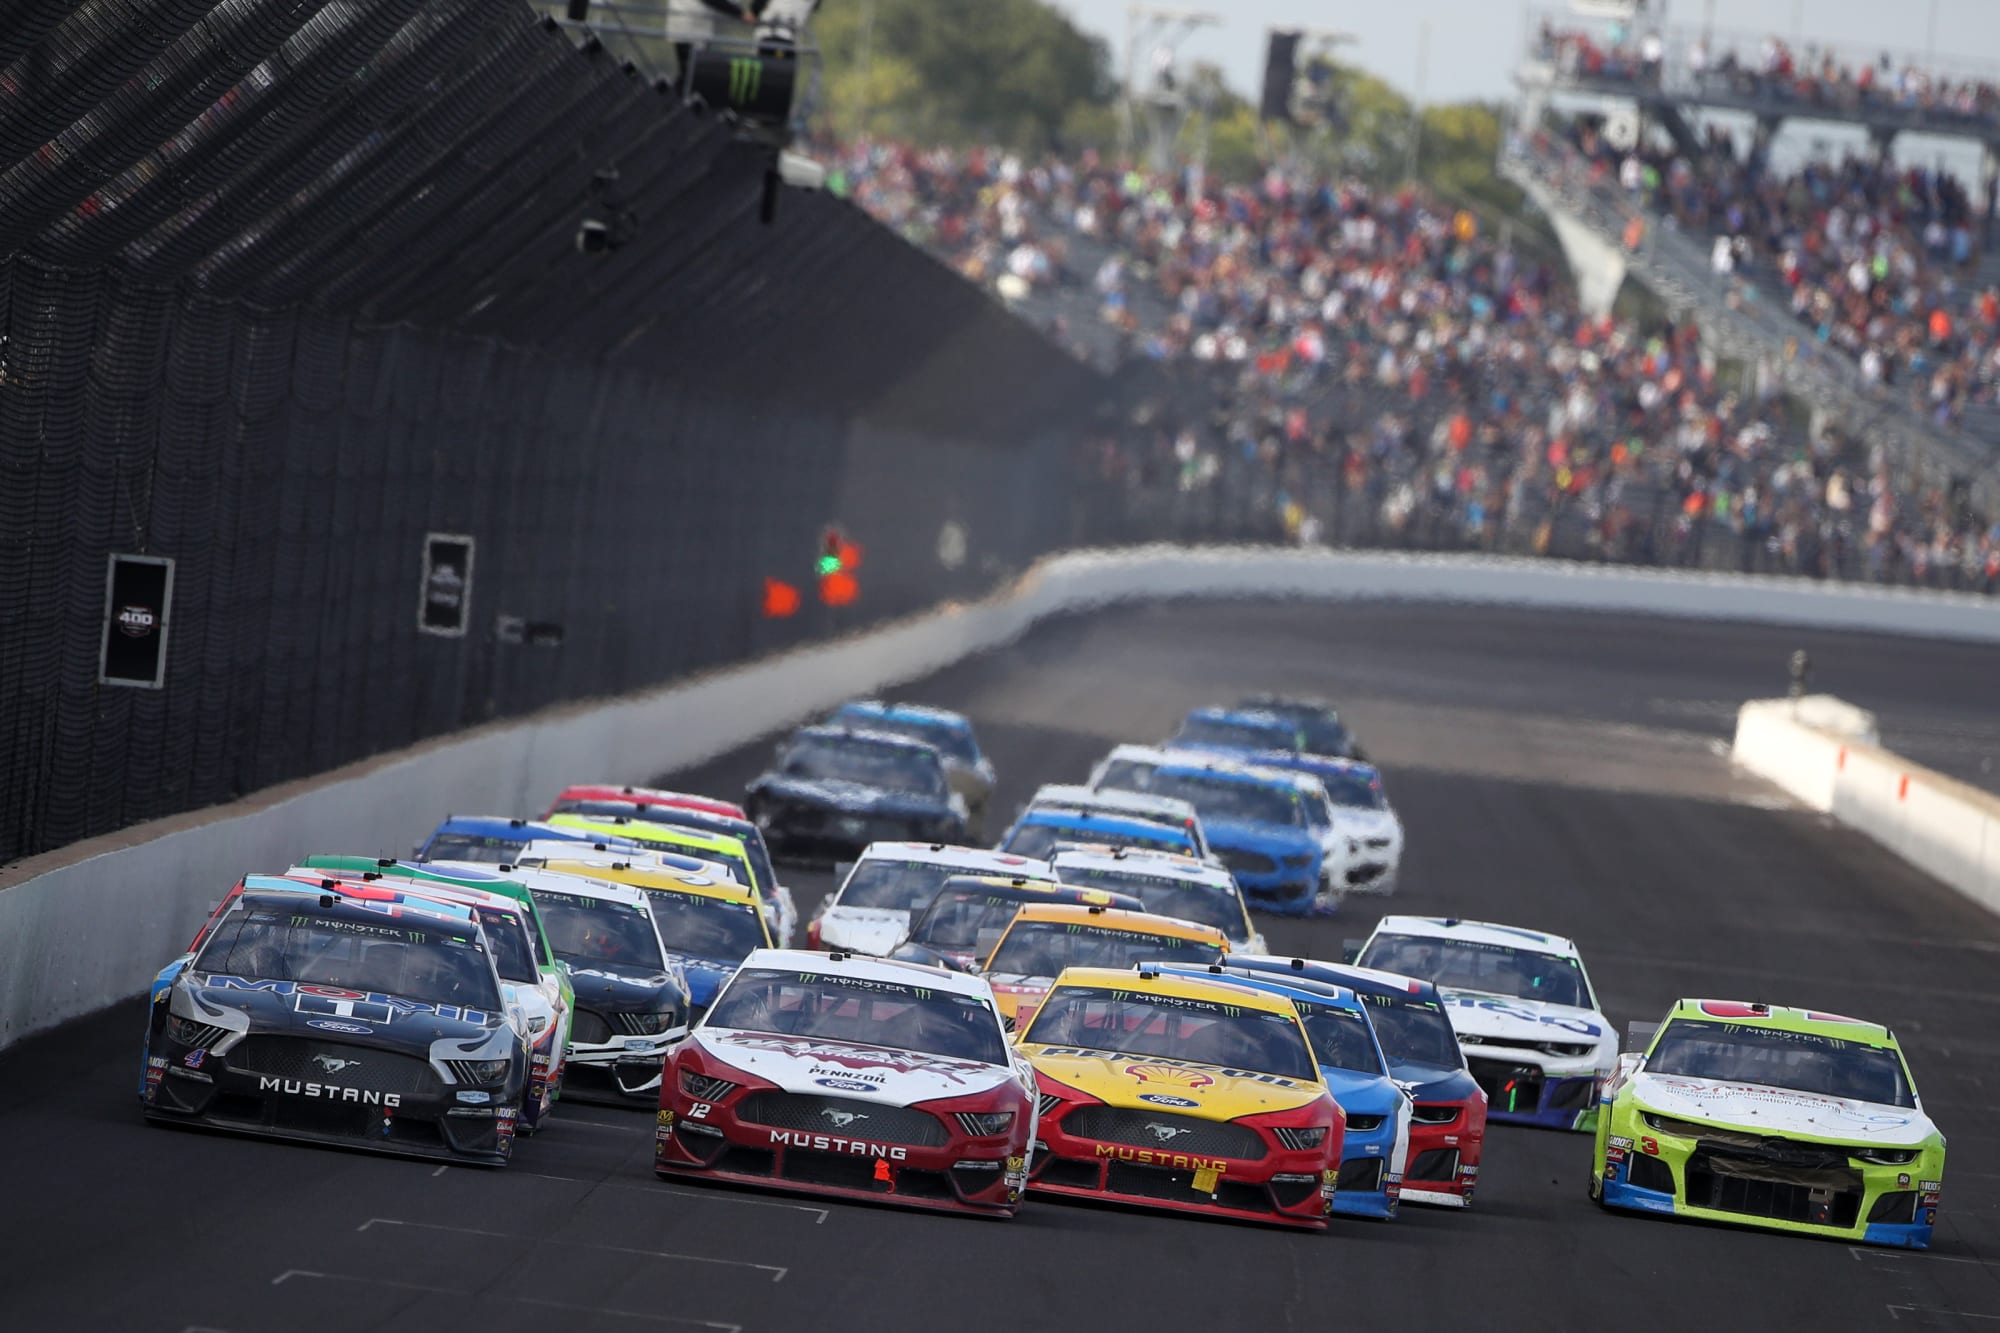 NASCAR Indianapolis road course in play for future events?